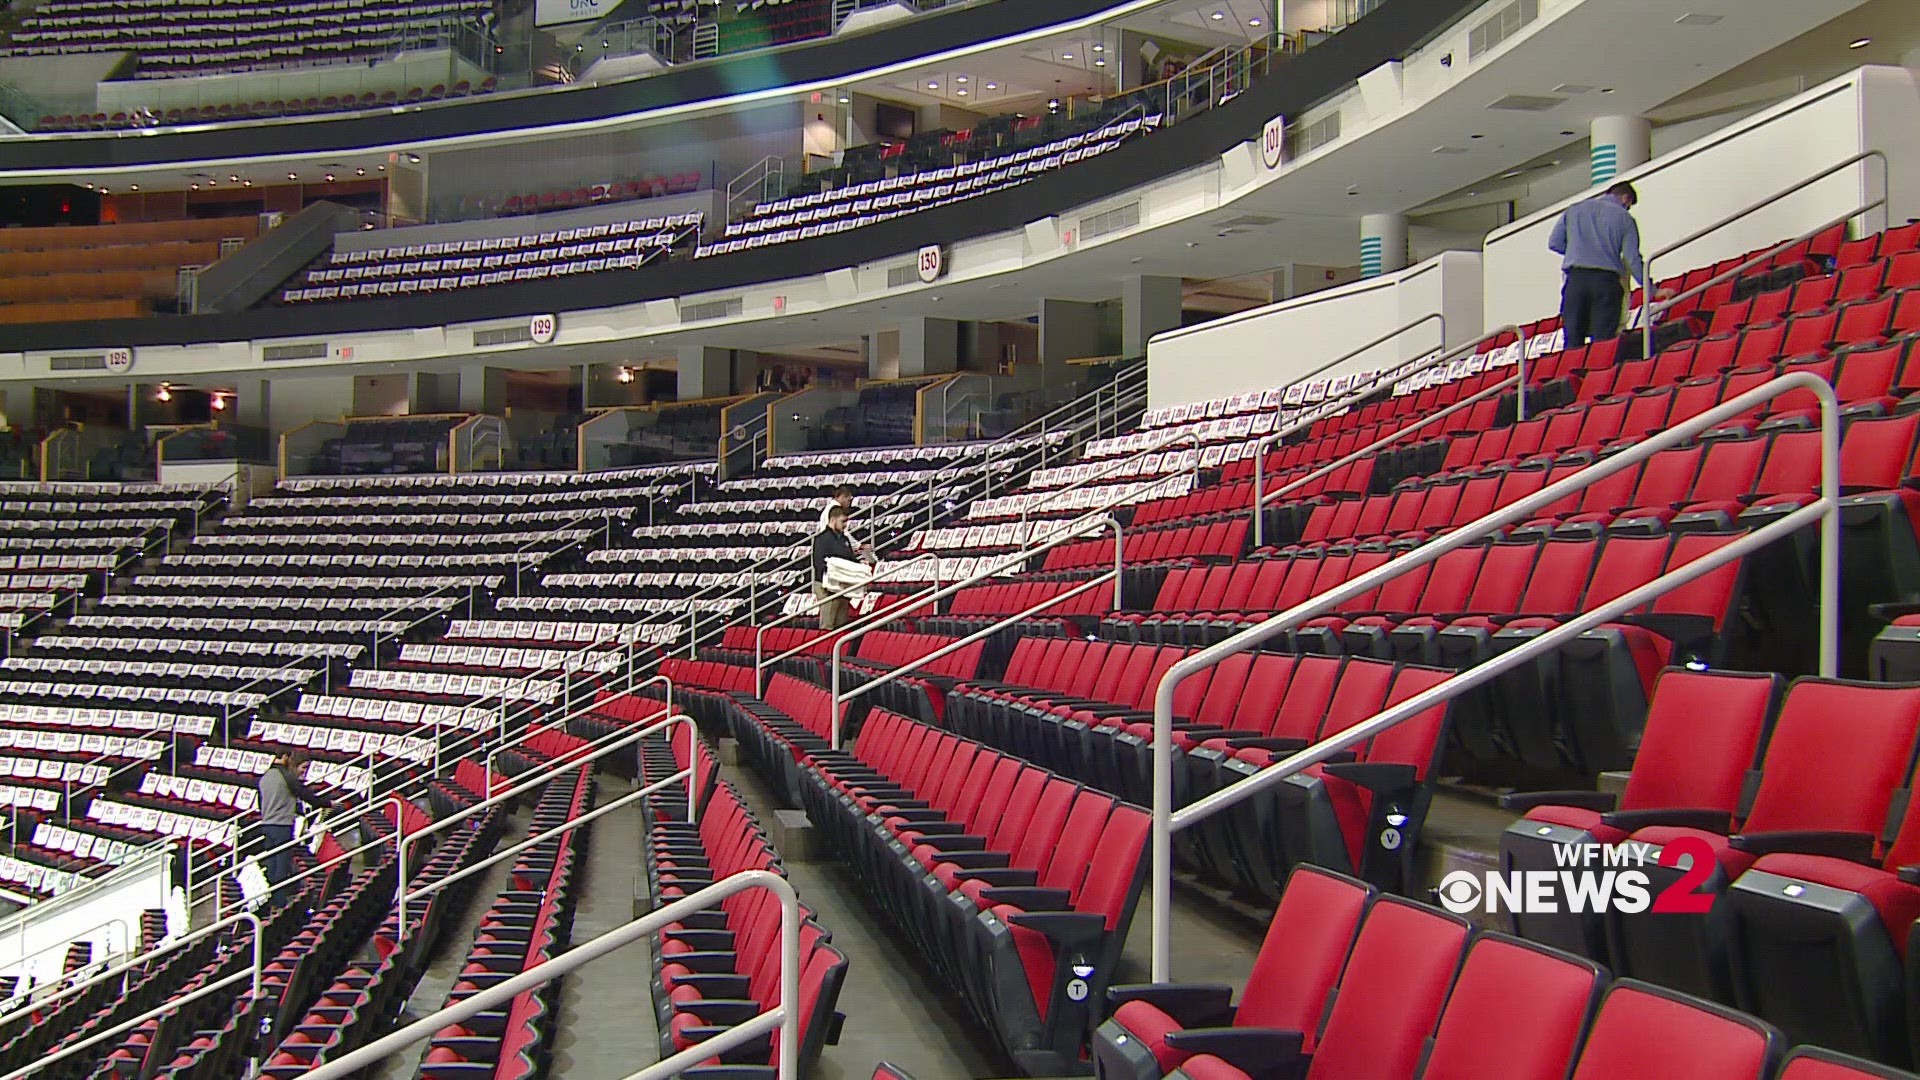 Thousands more fans allowed in PNC Arena to see Hurricanes in 2nd round of  playoffs